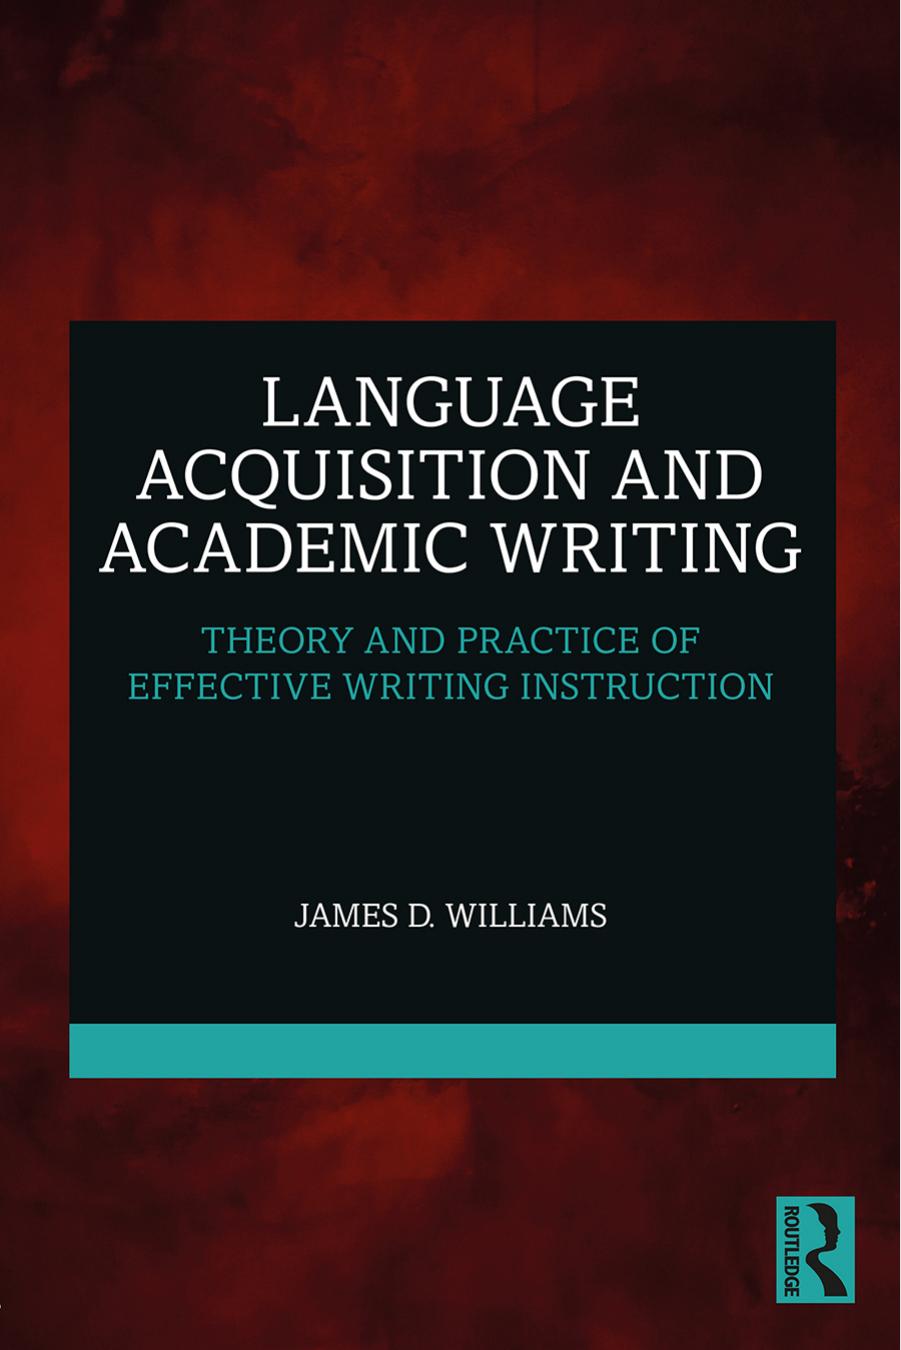 Language Acquisition and Academic Writing: Theory and Practice of Effective Writing Instruction by James D. Williams